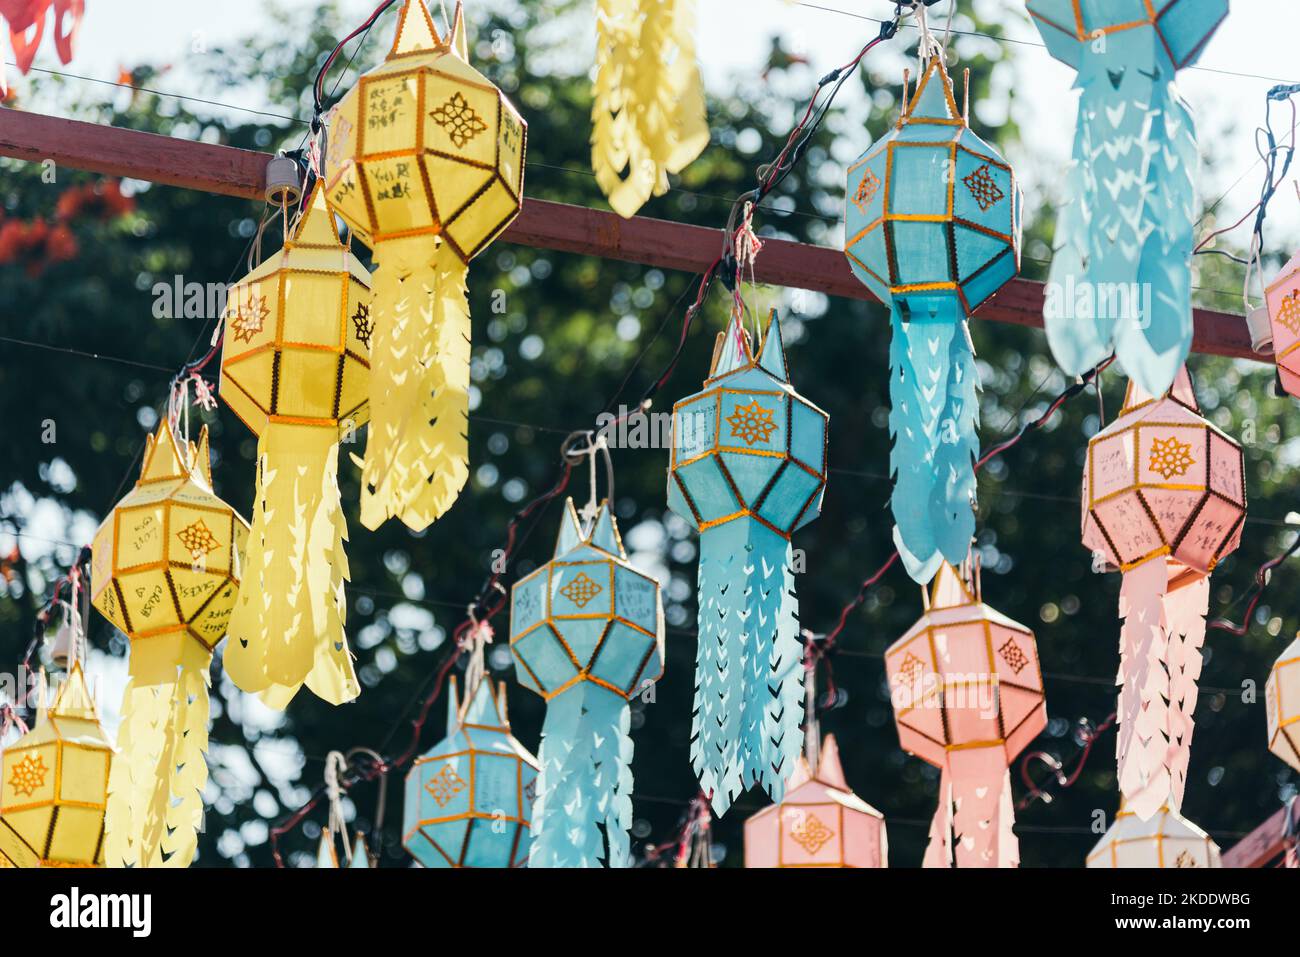 Paper lanterns hanging decorated in Loy Krathong festival Stock Photo